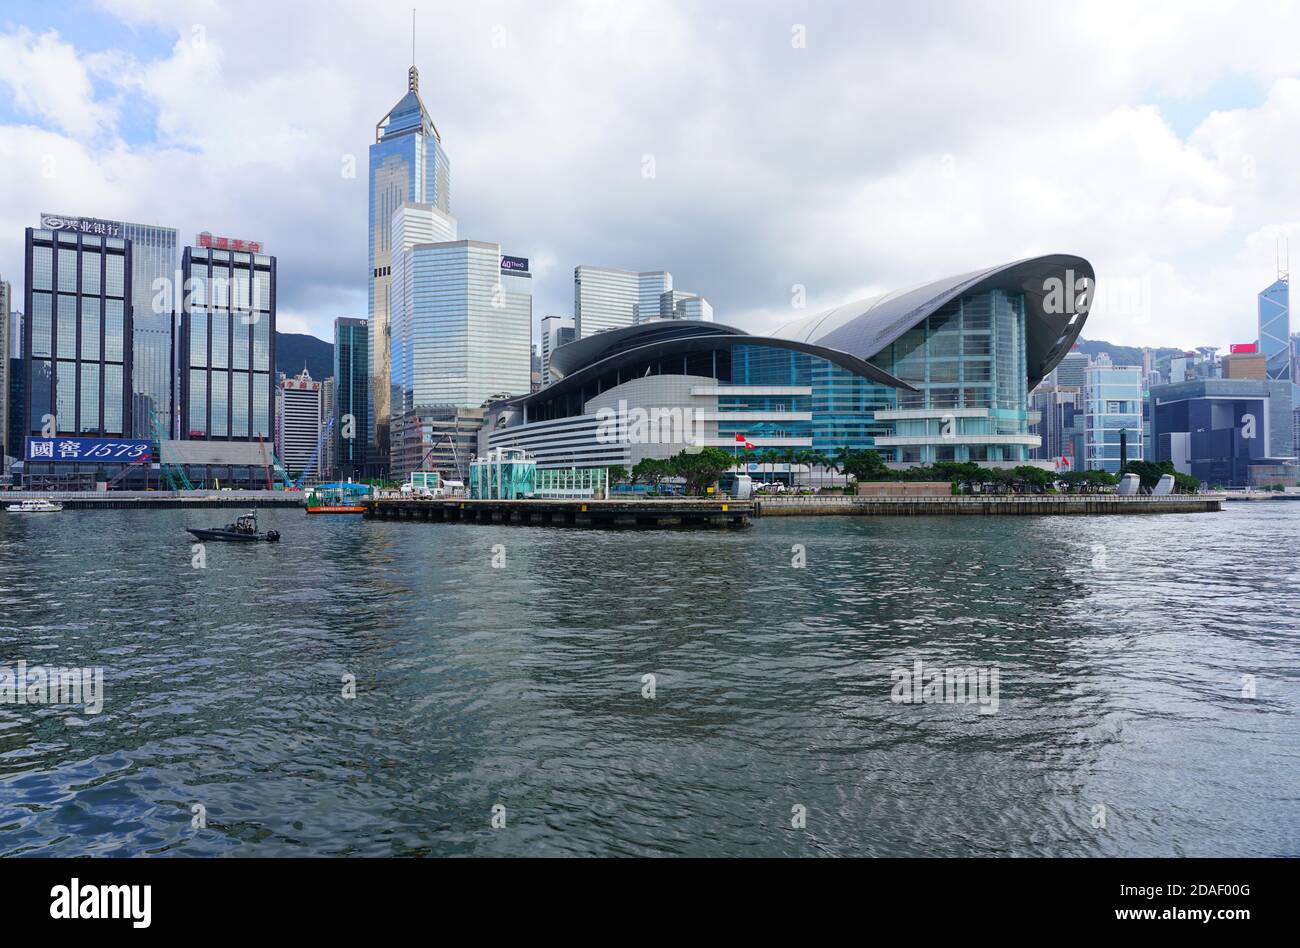 HONG KONG -29 JUN 2019- View of a Hong Kong police boat in the Victoria between Hong Kong and Kowloon in front of the Wan Chai Convention Center in Ju Stock Photo